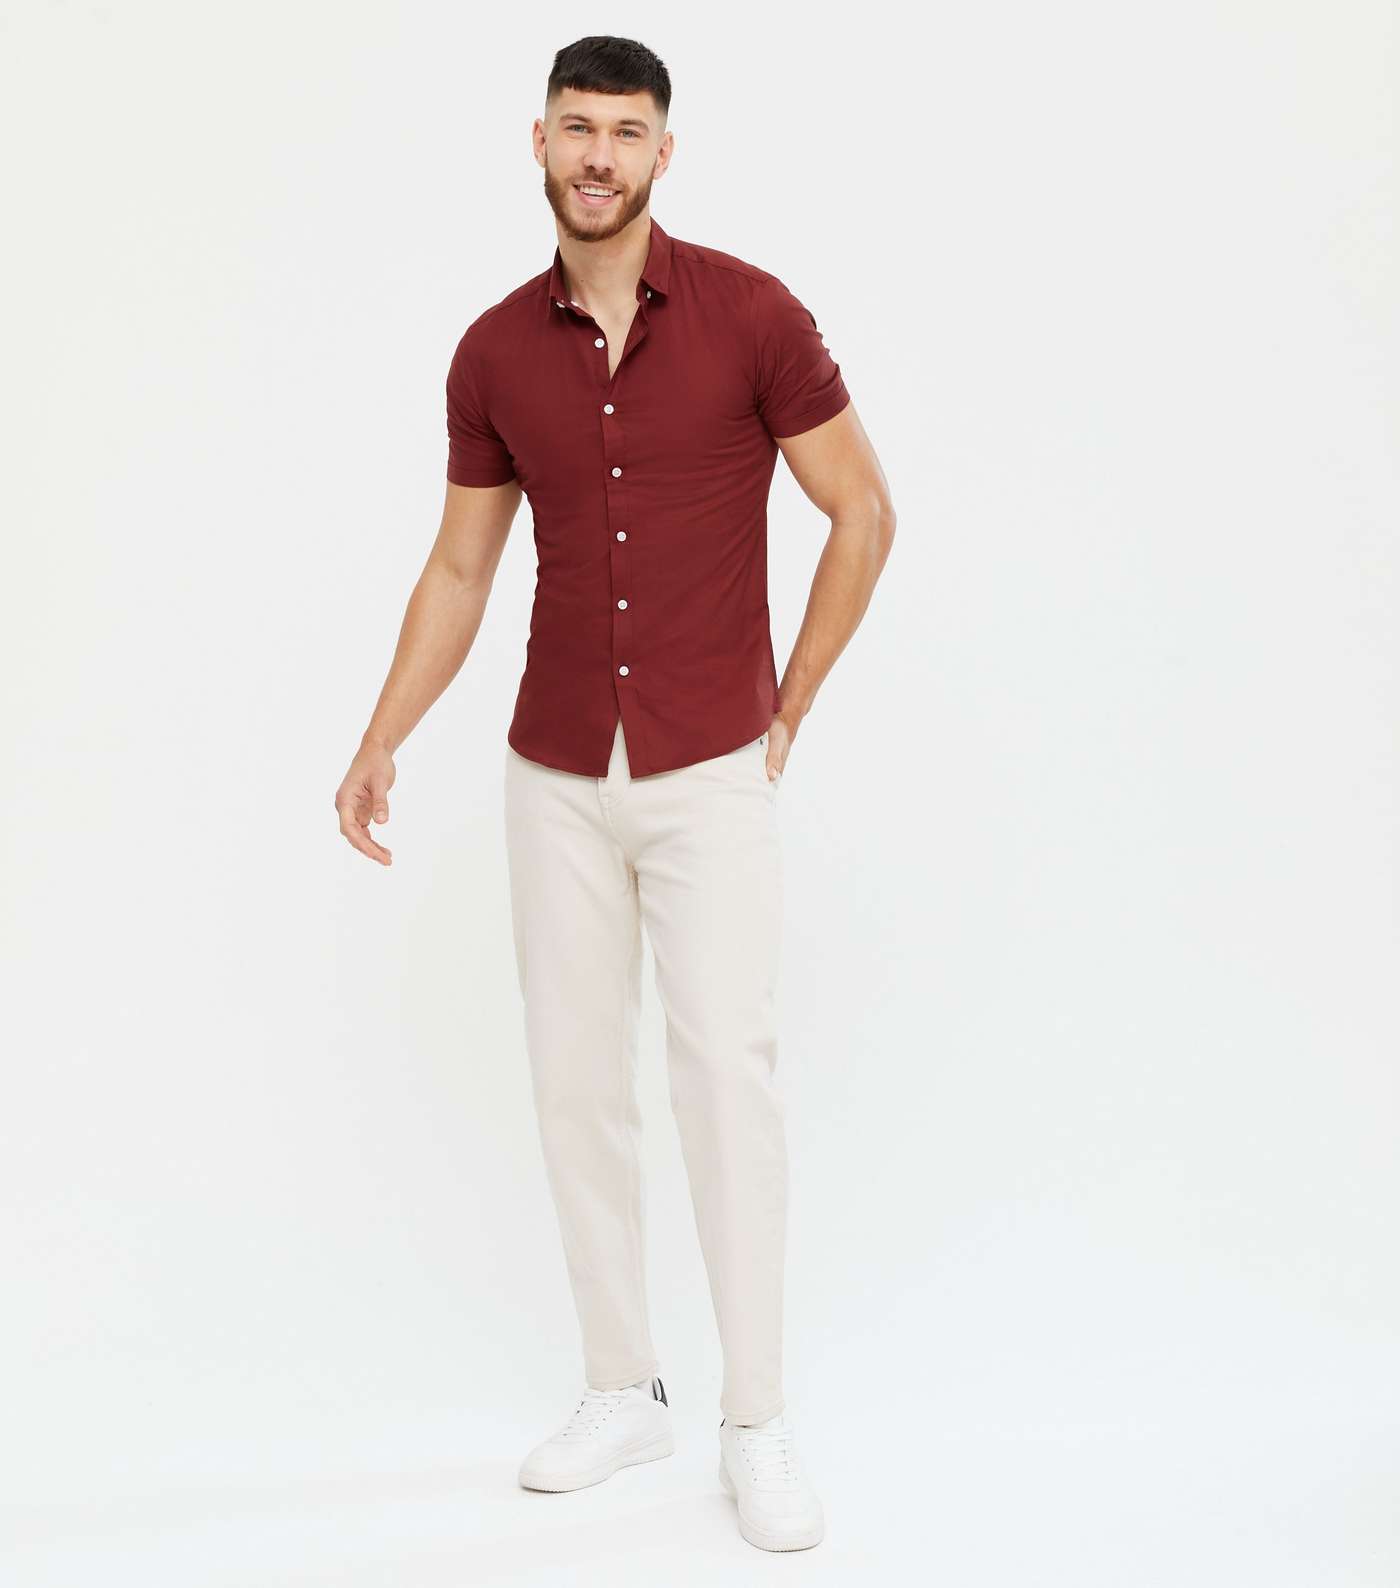 Burgundy Short Sleeve Muscle Fit Oxford Shirt Image 2